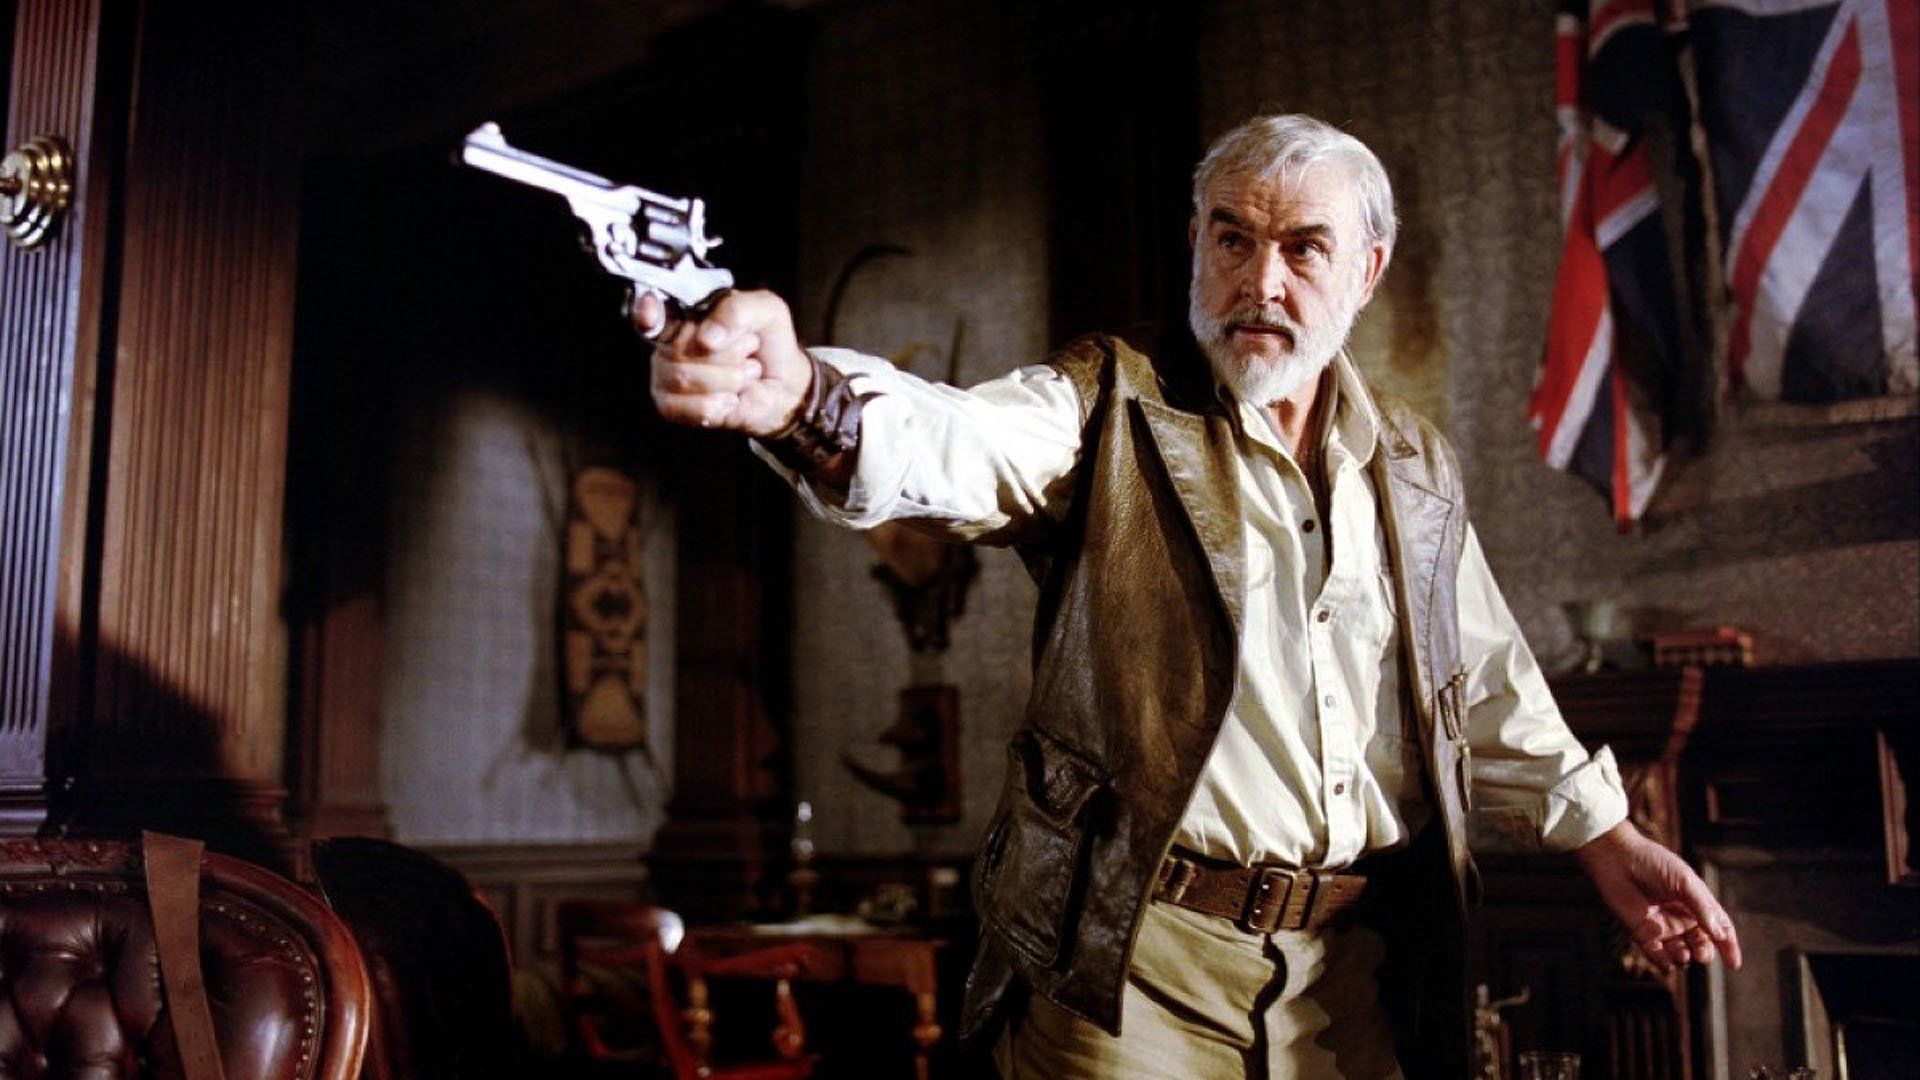 Connery's last role as Allan Quatermain in "The League of Extraordinary Gentlemen" (2003)